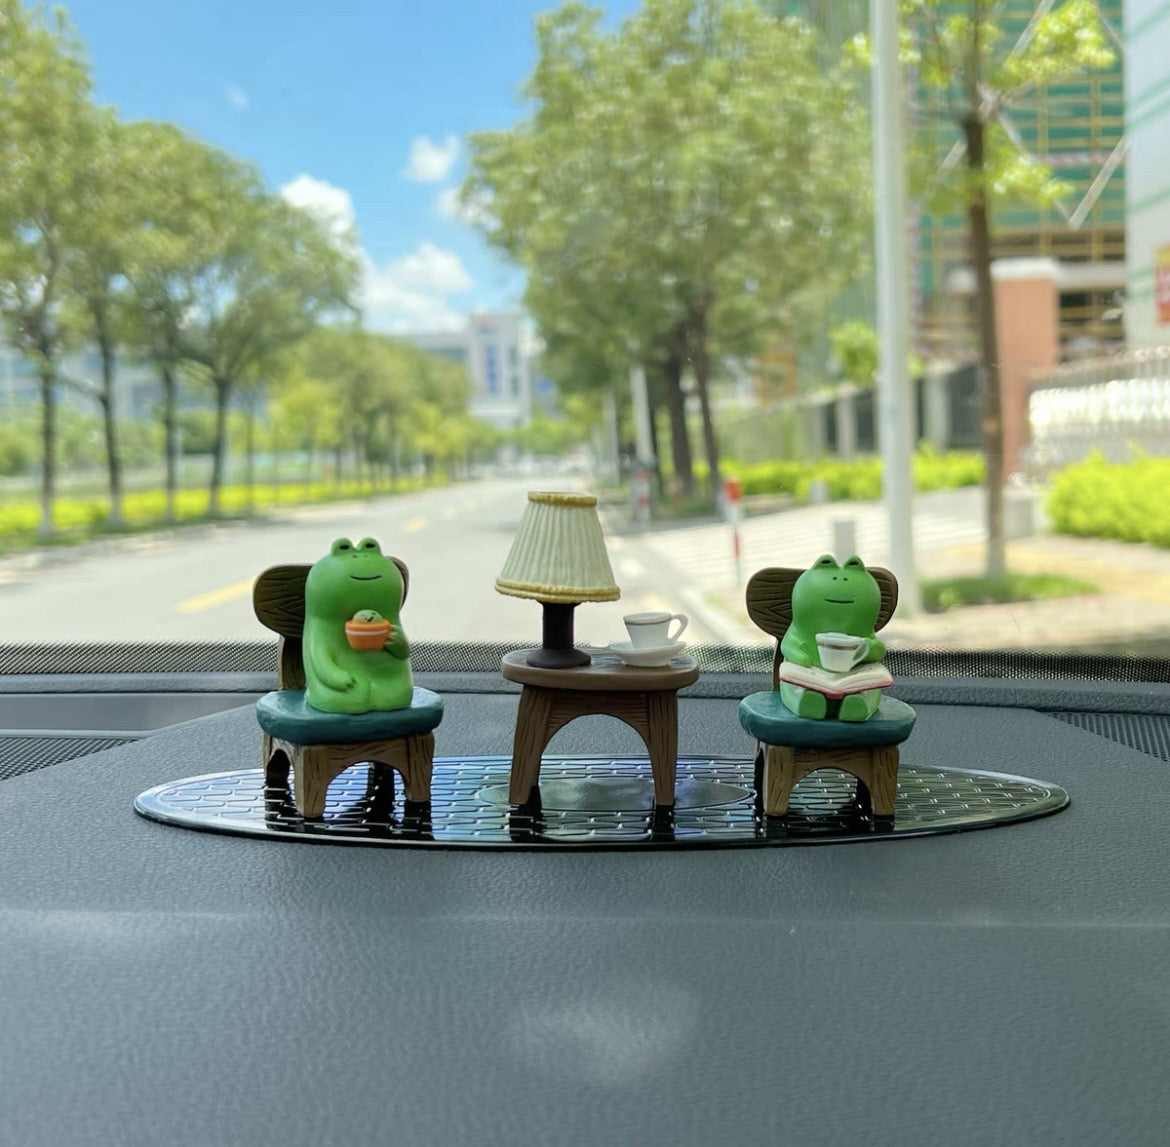 1.18-2.76 Inch Miniature Frog Car Ornament, Cartoon Animal Cat Car Dashboard Decoration, Desk and Office Ornament, Plant Stand - Frog Lover's Decorative Gift